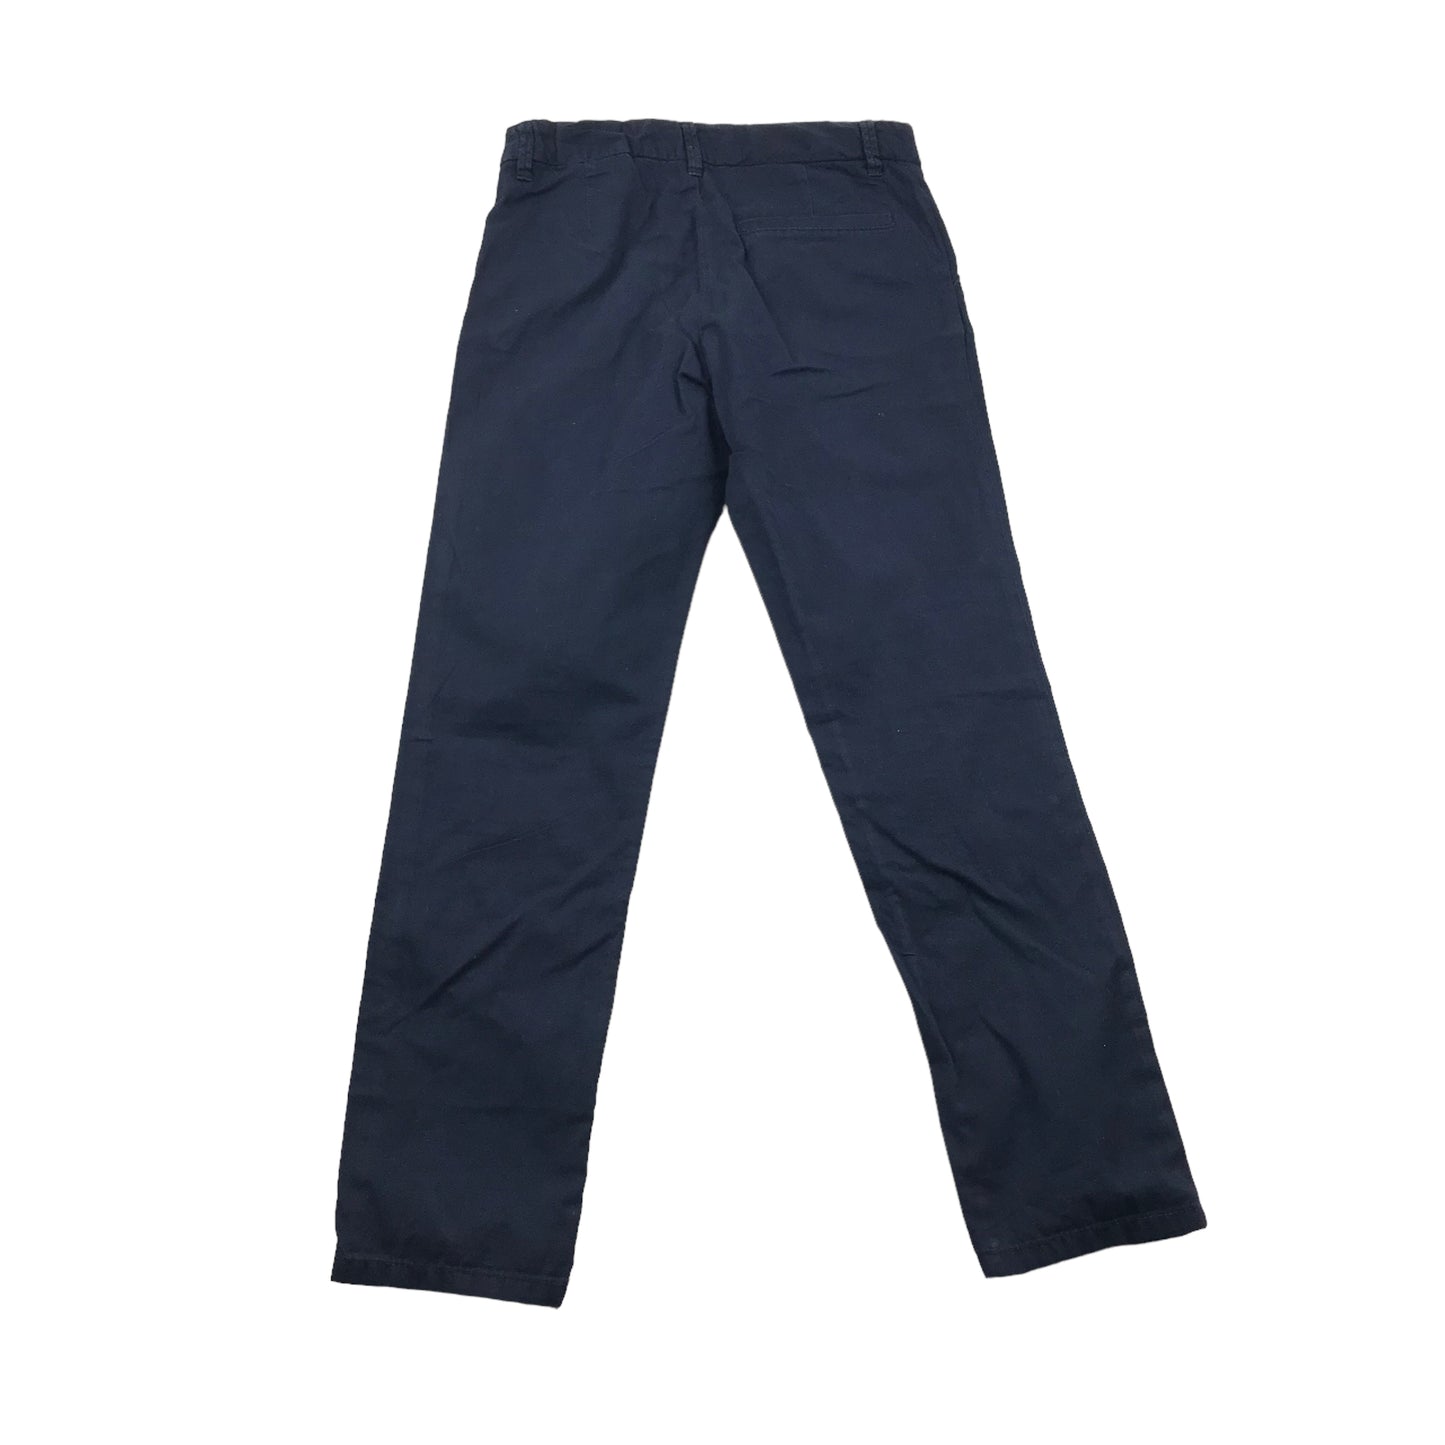 H&M Navy Blue Chino Style Trousers Age 8